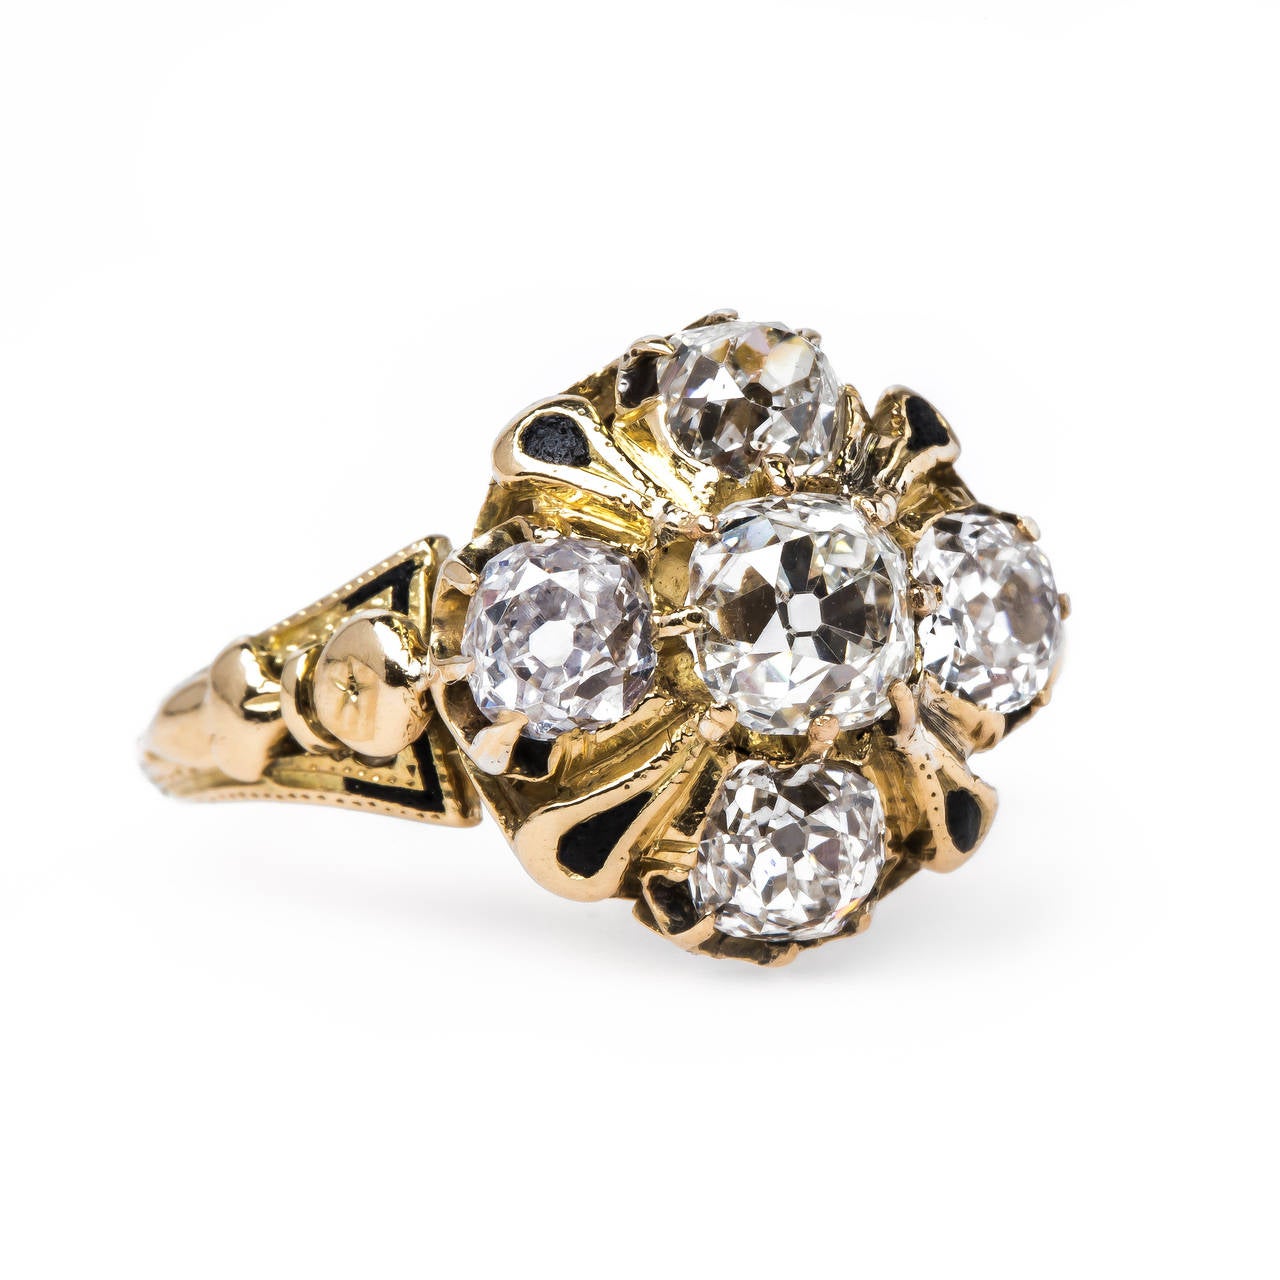 Louvre is a spectacular authentic Victorian era (circa 1880) 14k yellow gold ring centering an eight-prong set 0.80ct EGL certified Old Mine Brilliant Cut diamond graded H color and VS1 clarity. The center diamond is further flanked on the top,